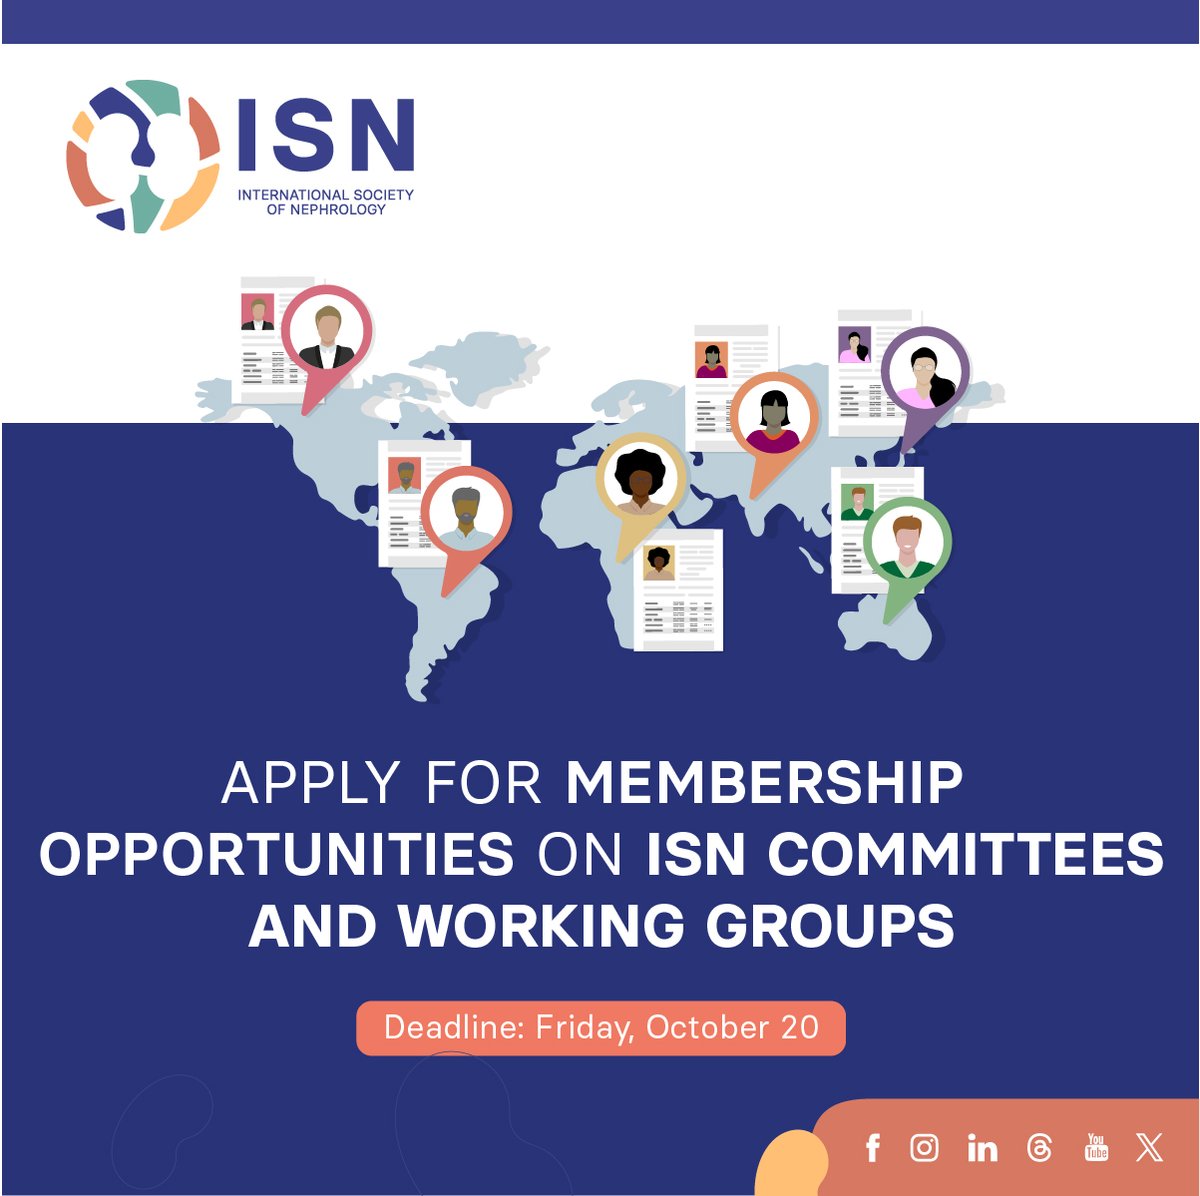 Your expertise matters - Apply to join ISN Committees and Working Groups for 2024! ⏳ Application deadline: October 20, 5 pm CEST. Learn more: ow.ly/sFFg50PUBlp Several ISN committees and working groups are looking to fill vacancies for positions starting at the World…